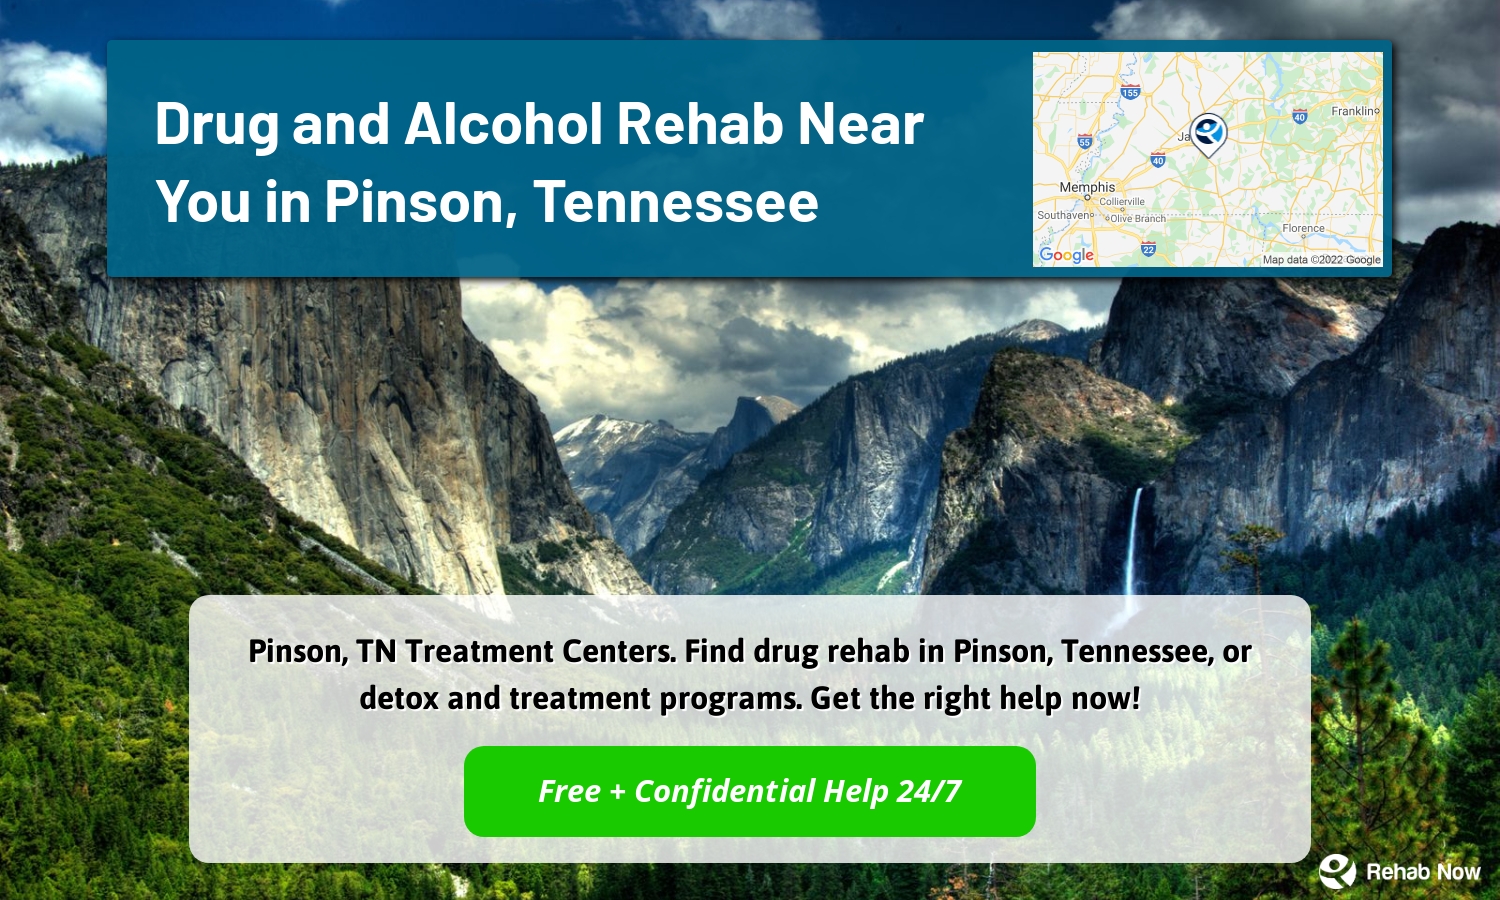 Pinson, TN Treatment Centers. Find drug rehab in Pinson, Tennessee, or detox and treatment programs. Get the right help now!